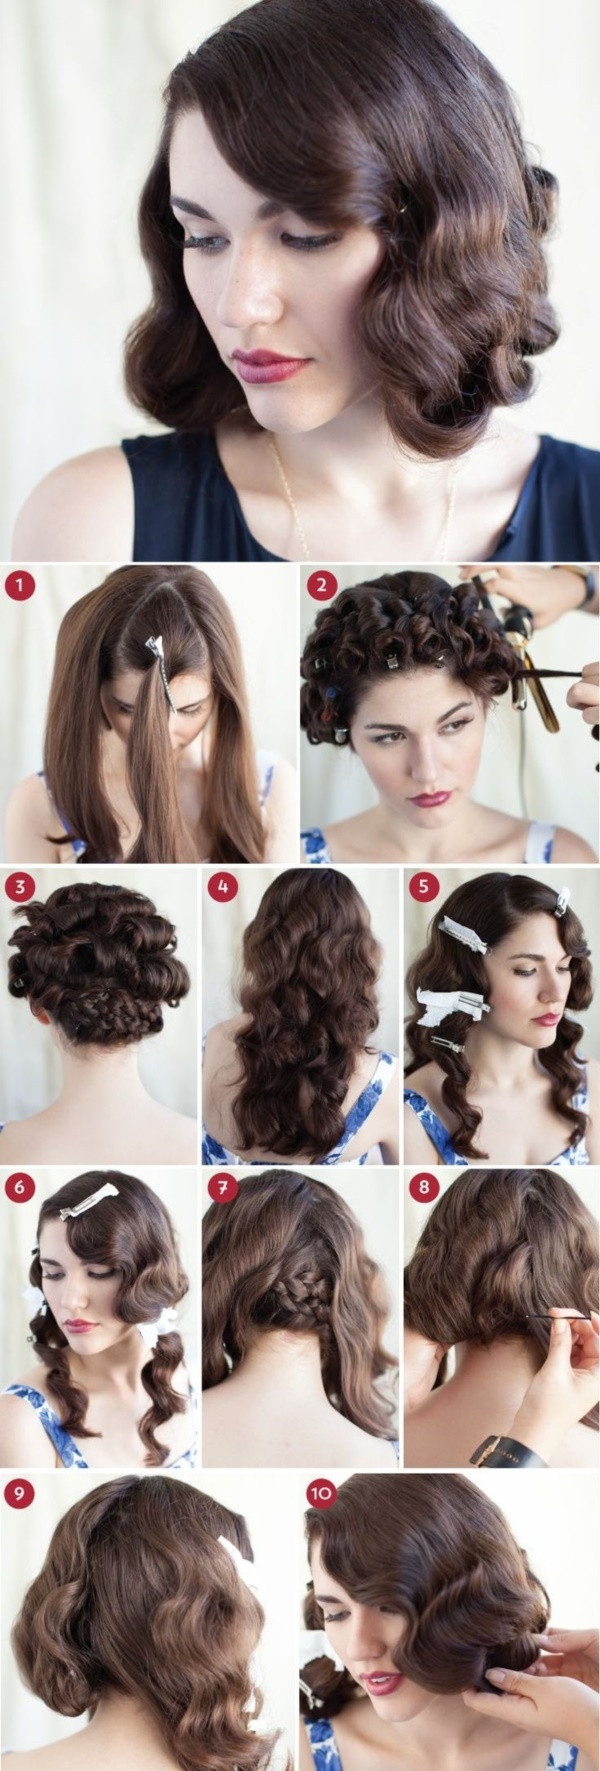 DIY Hairstyle For Long Hair
 101 Easy DIY Hairstyles for Medium and Long Hair to snatch